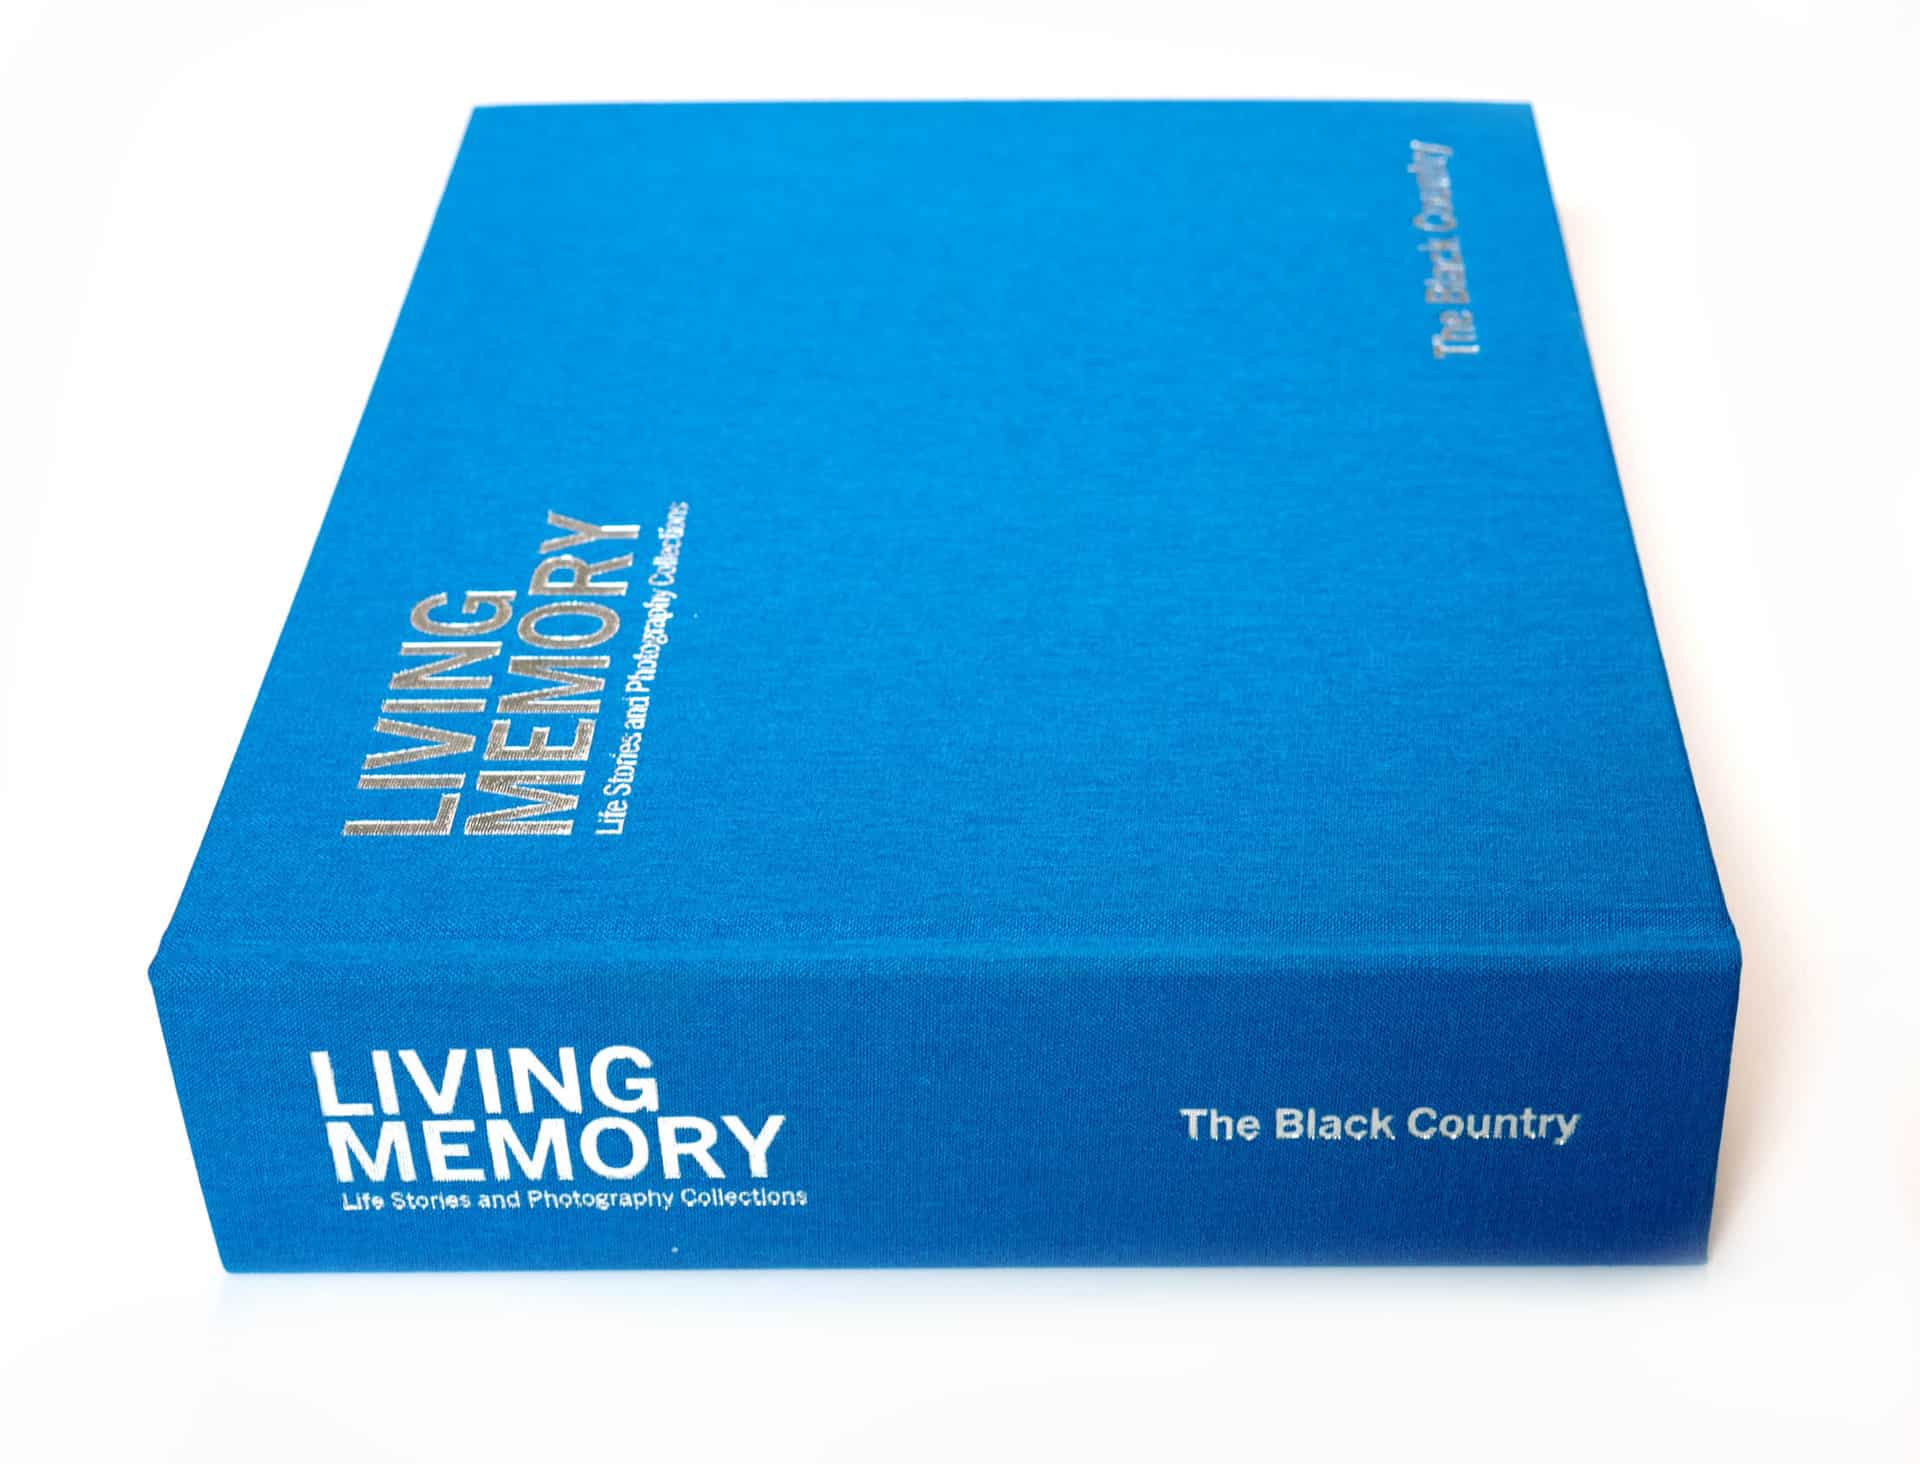 The Living Memory book availabe here